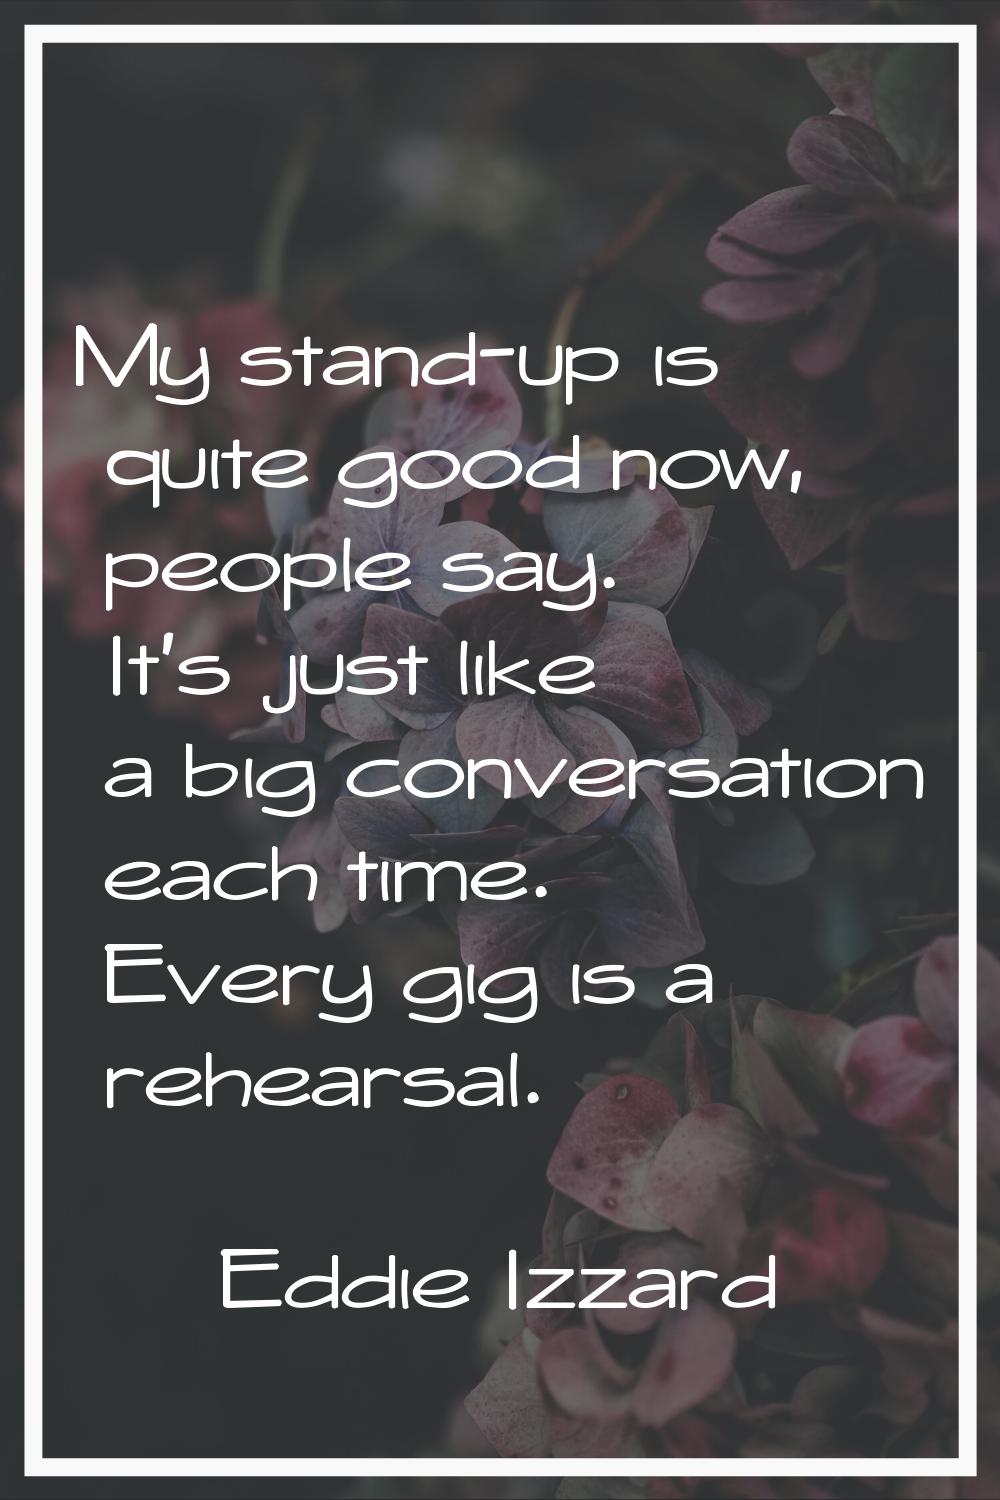 My stand-up is quite good now, people say. It's just like a big conversation each time. Every gig i